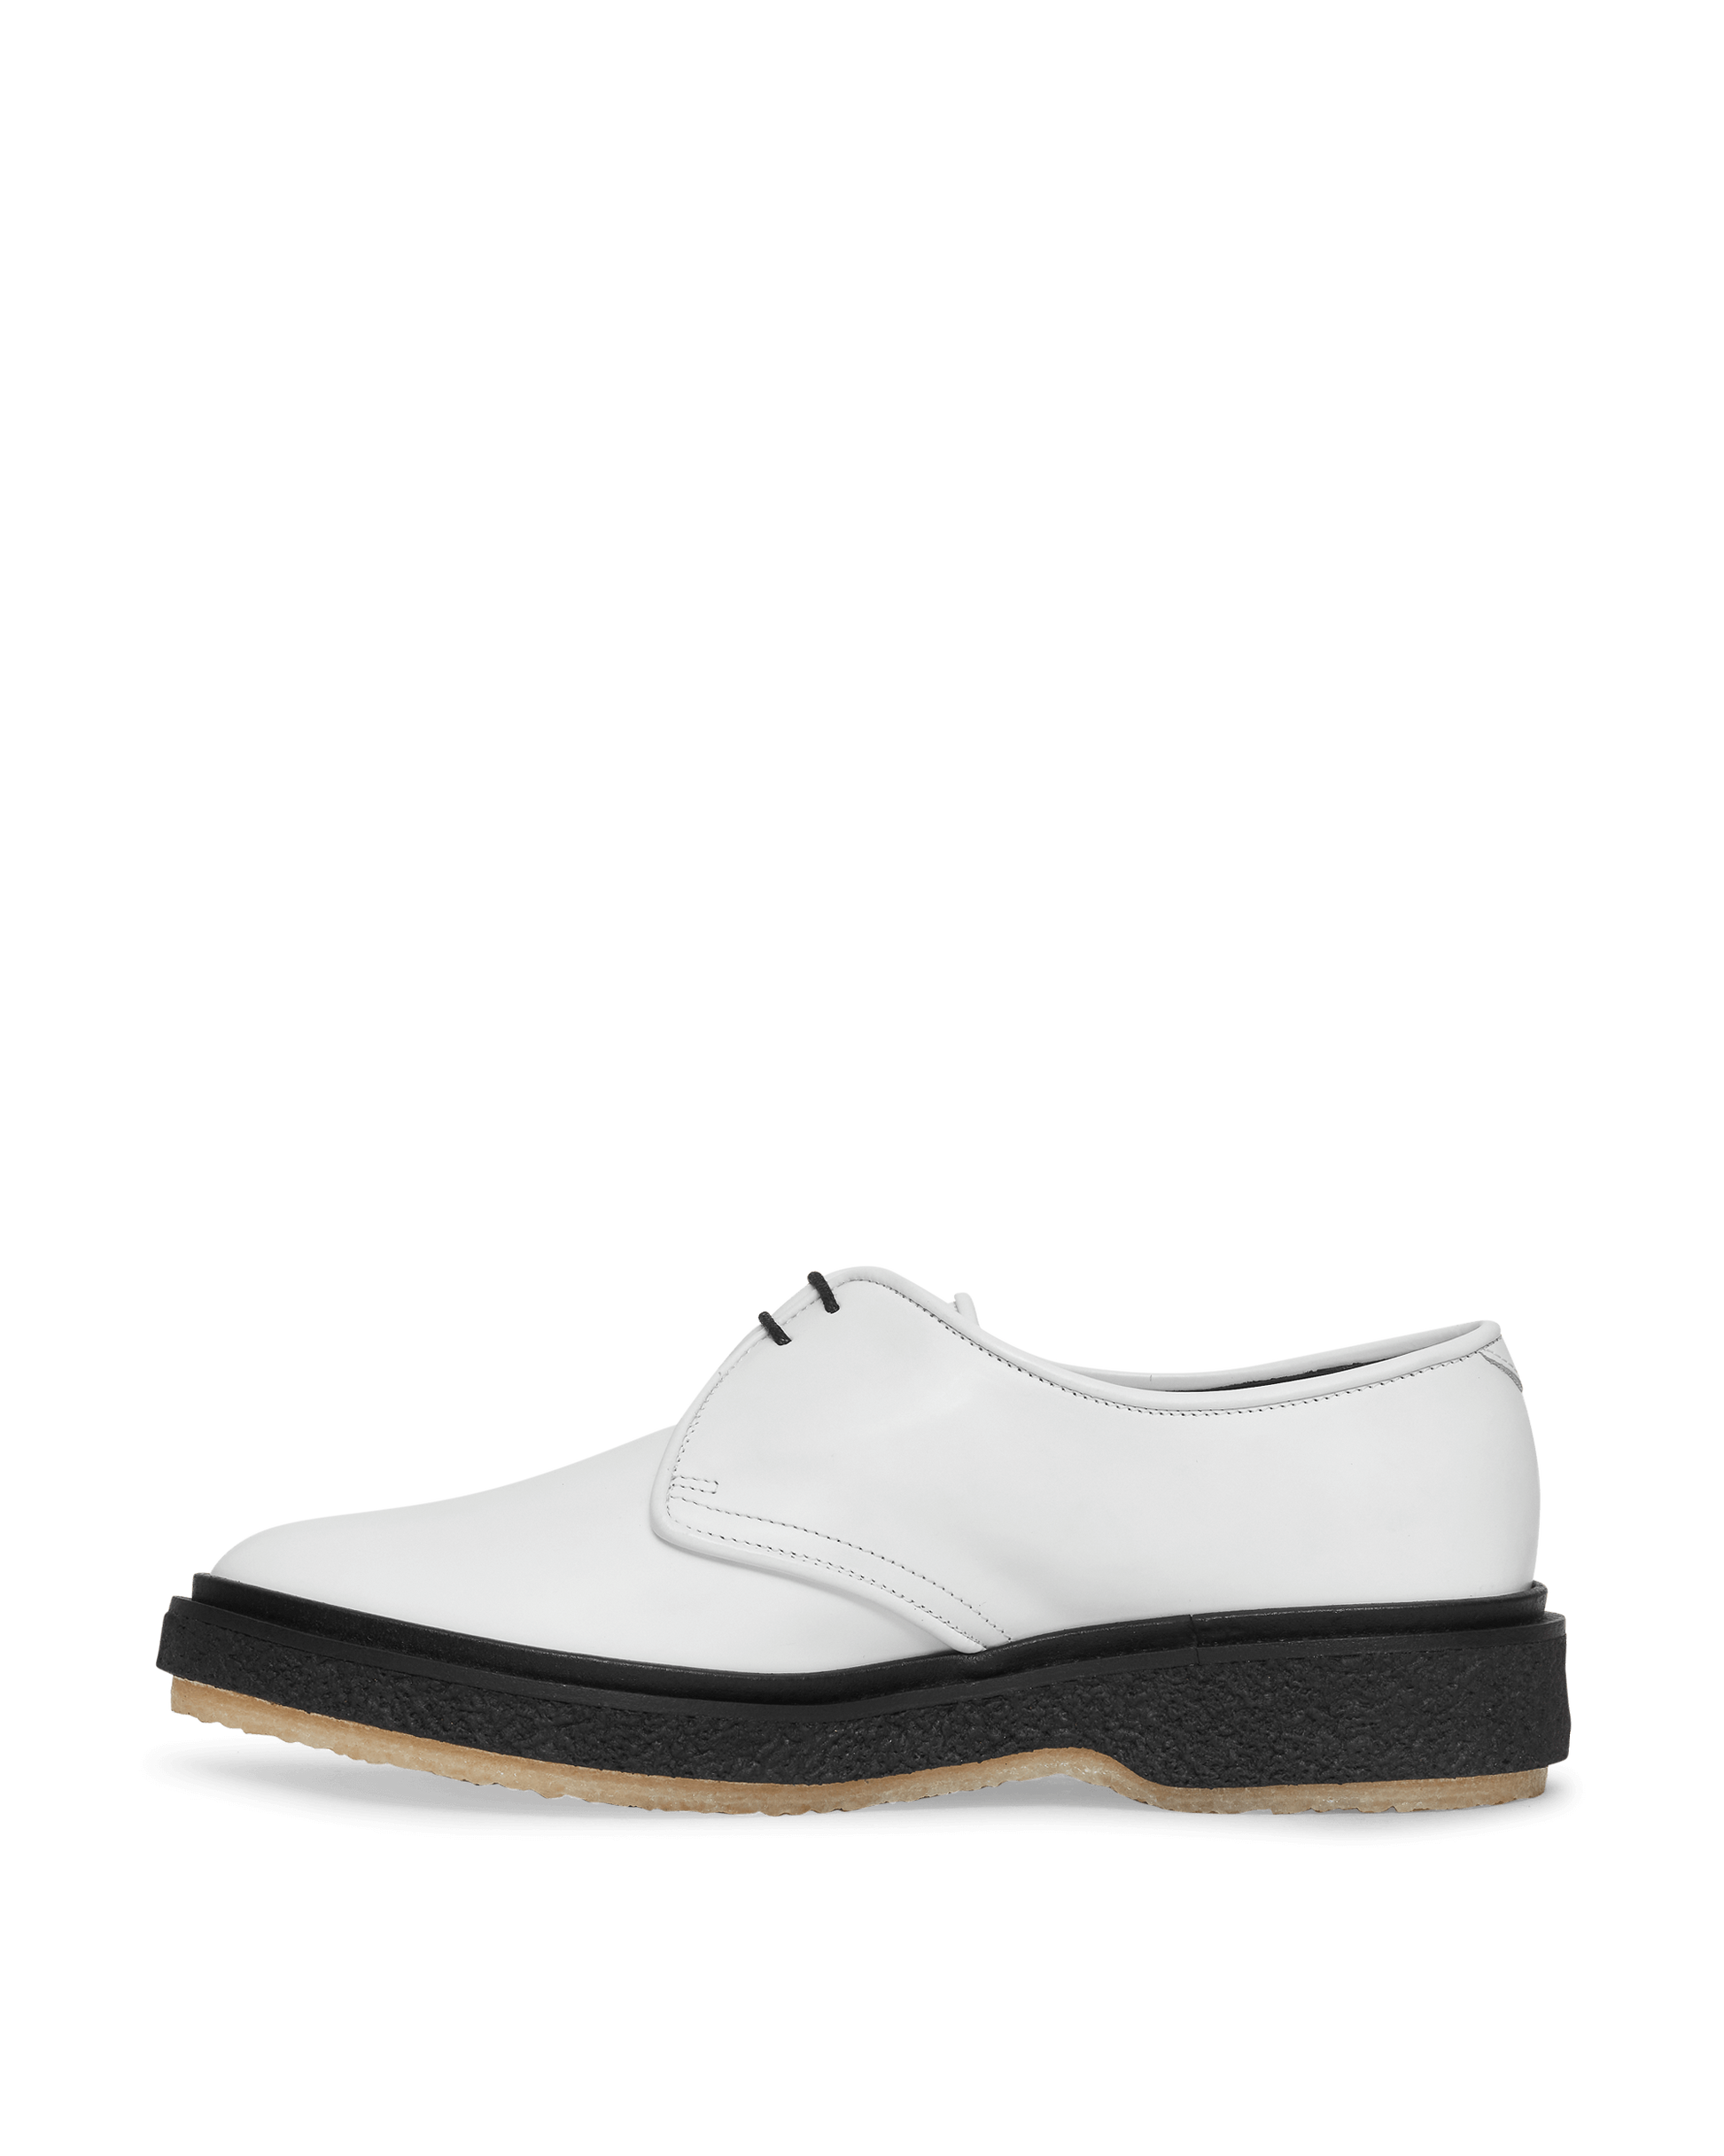 Adieu Paris Type 1 Classic White Classic Shoes Laced Up ADTYPE1 001